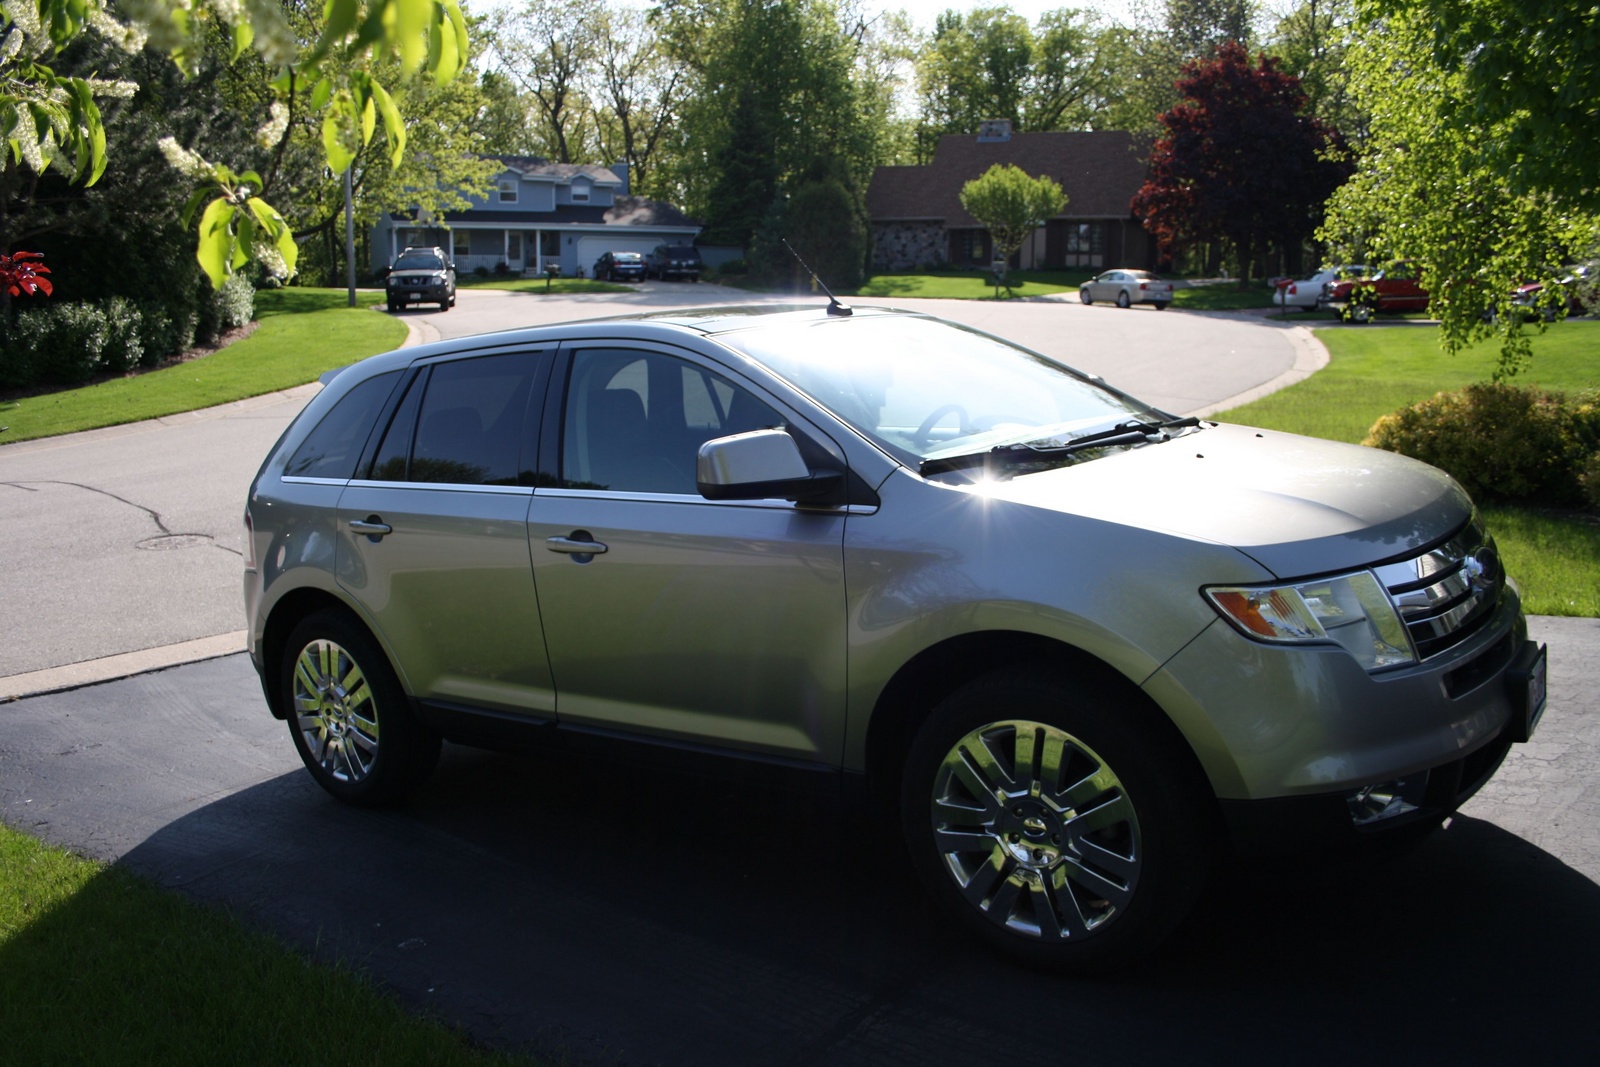 2008 Ford edge towing capacity #10